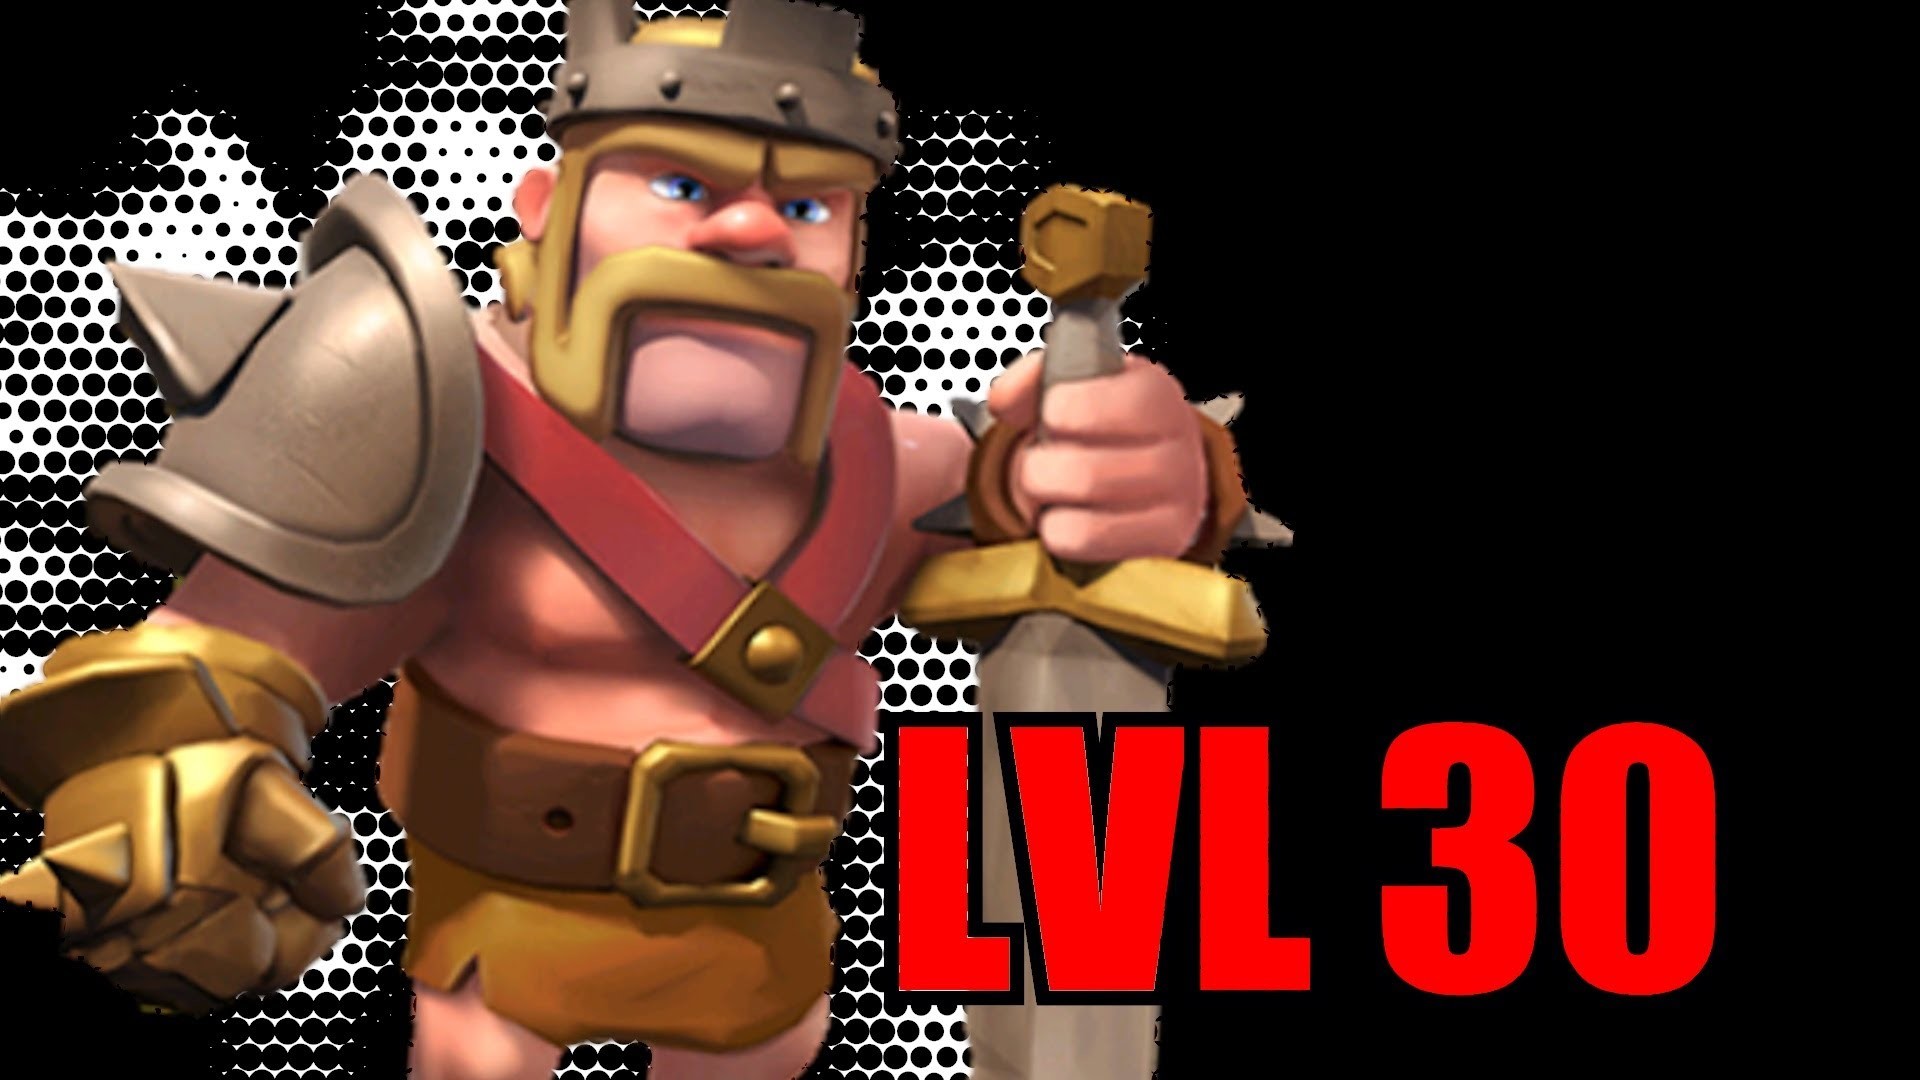 1920x1080 18> Images For - Clash Of Clans Barbarian King And Archer Queen .